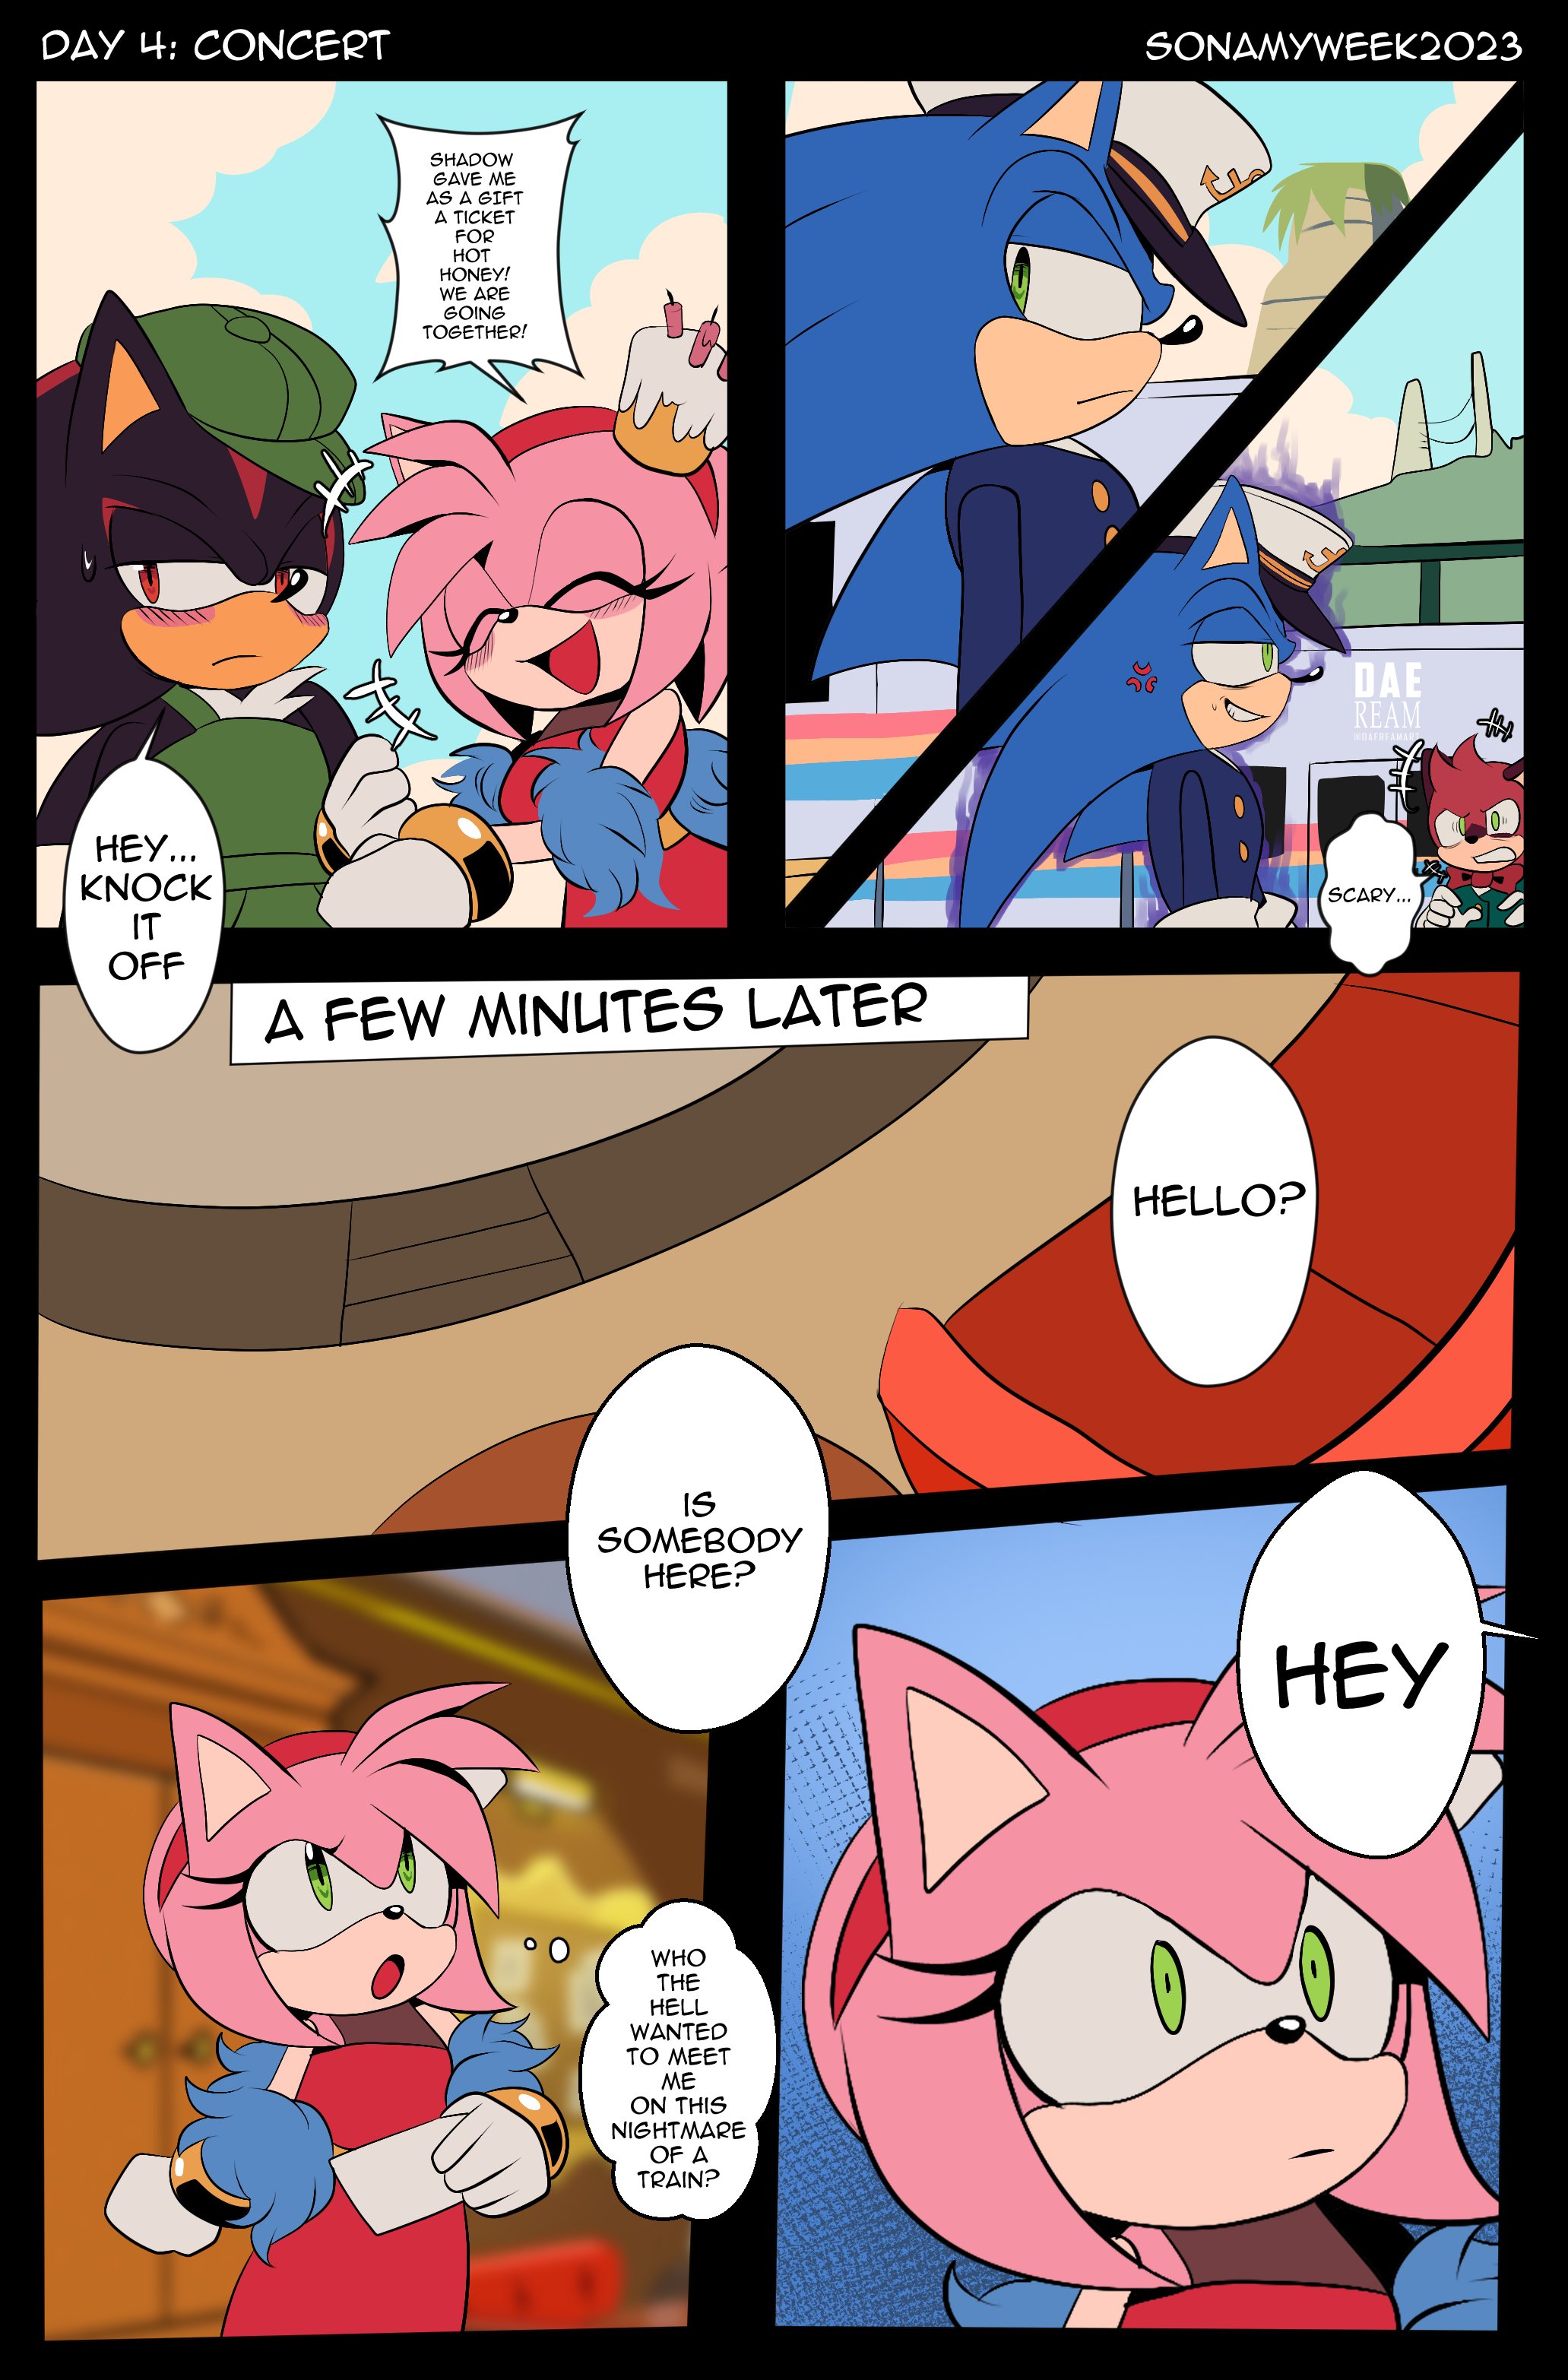 It's Show Time ☆ !! — sonamy commission for Andrew on Twitter :D